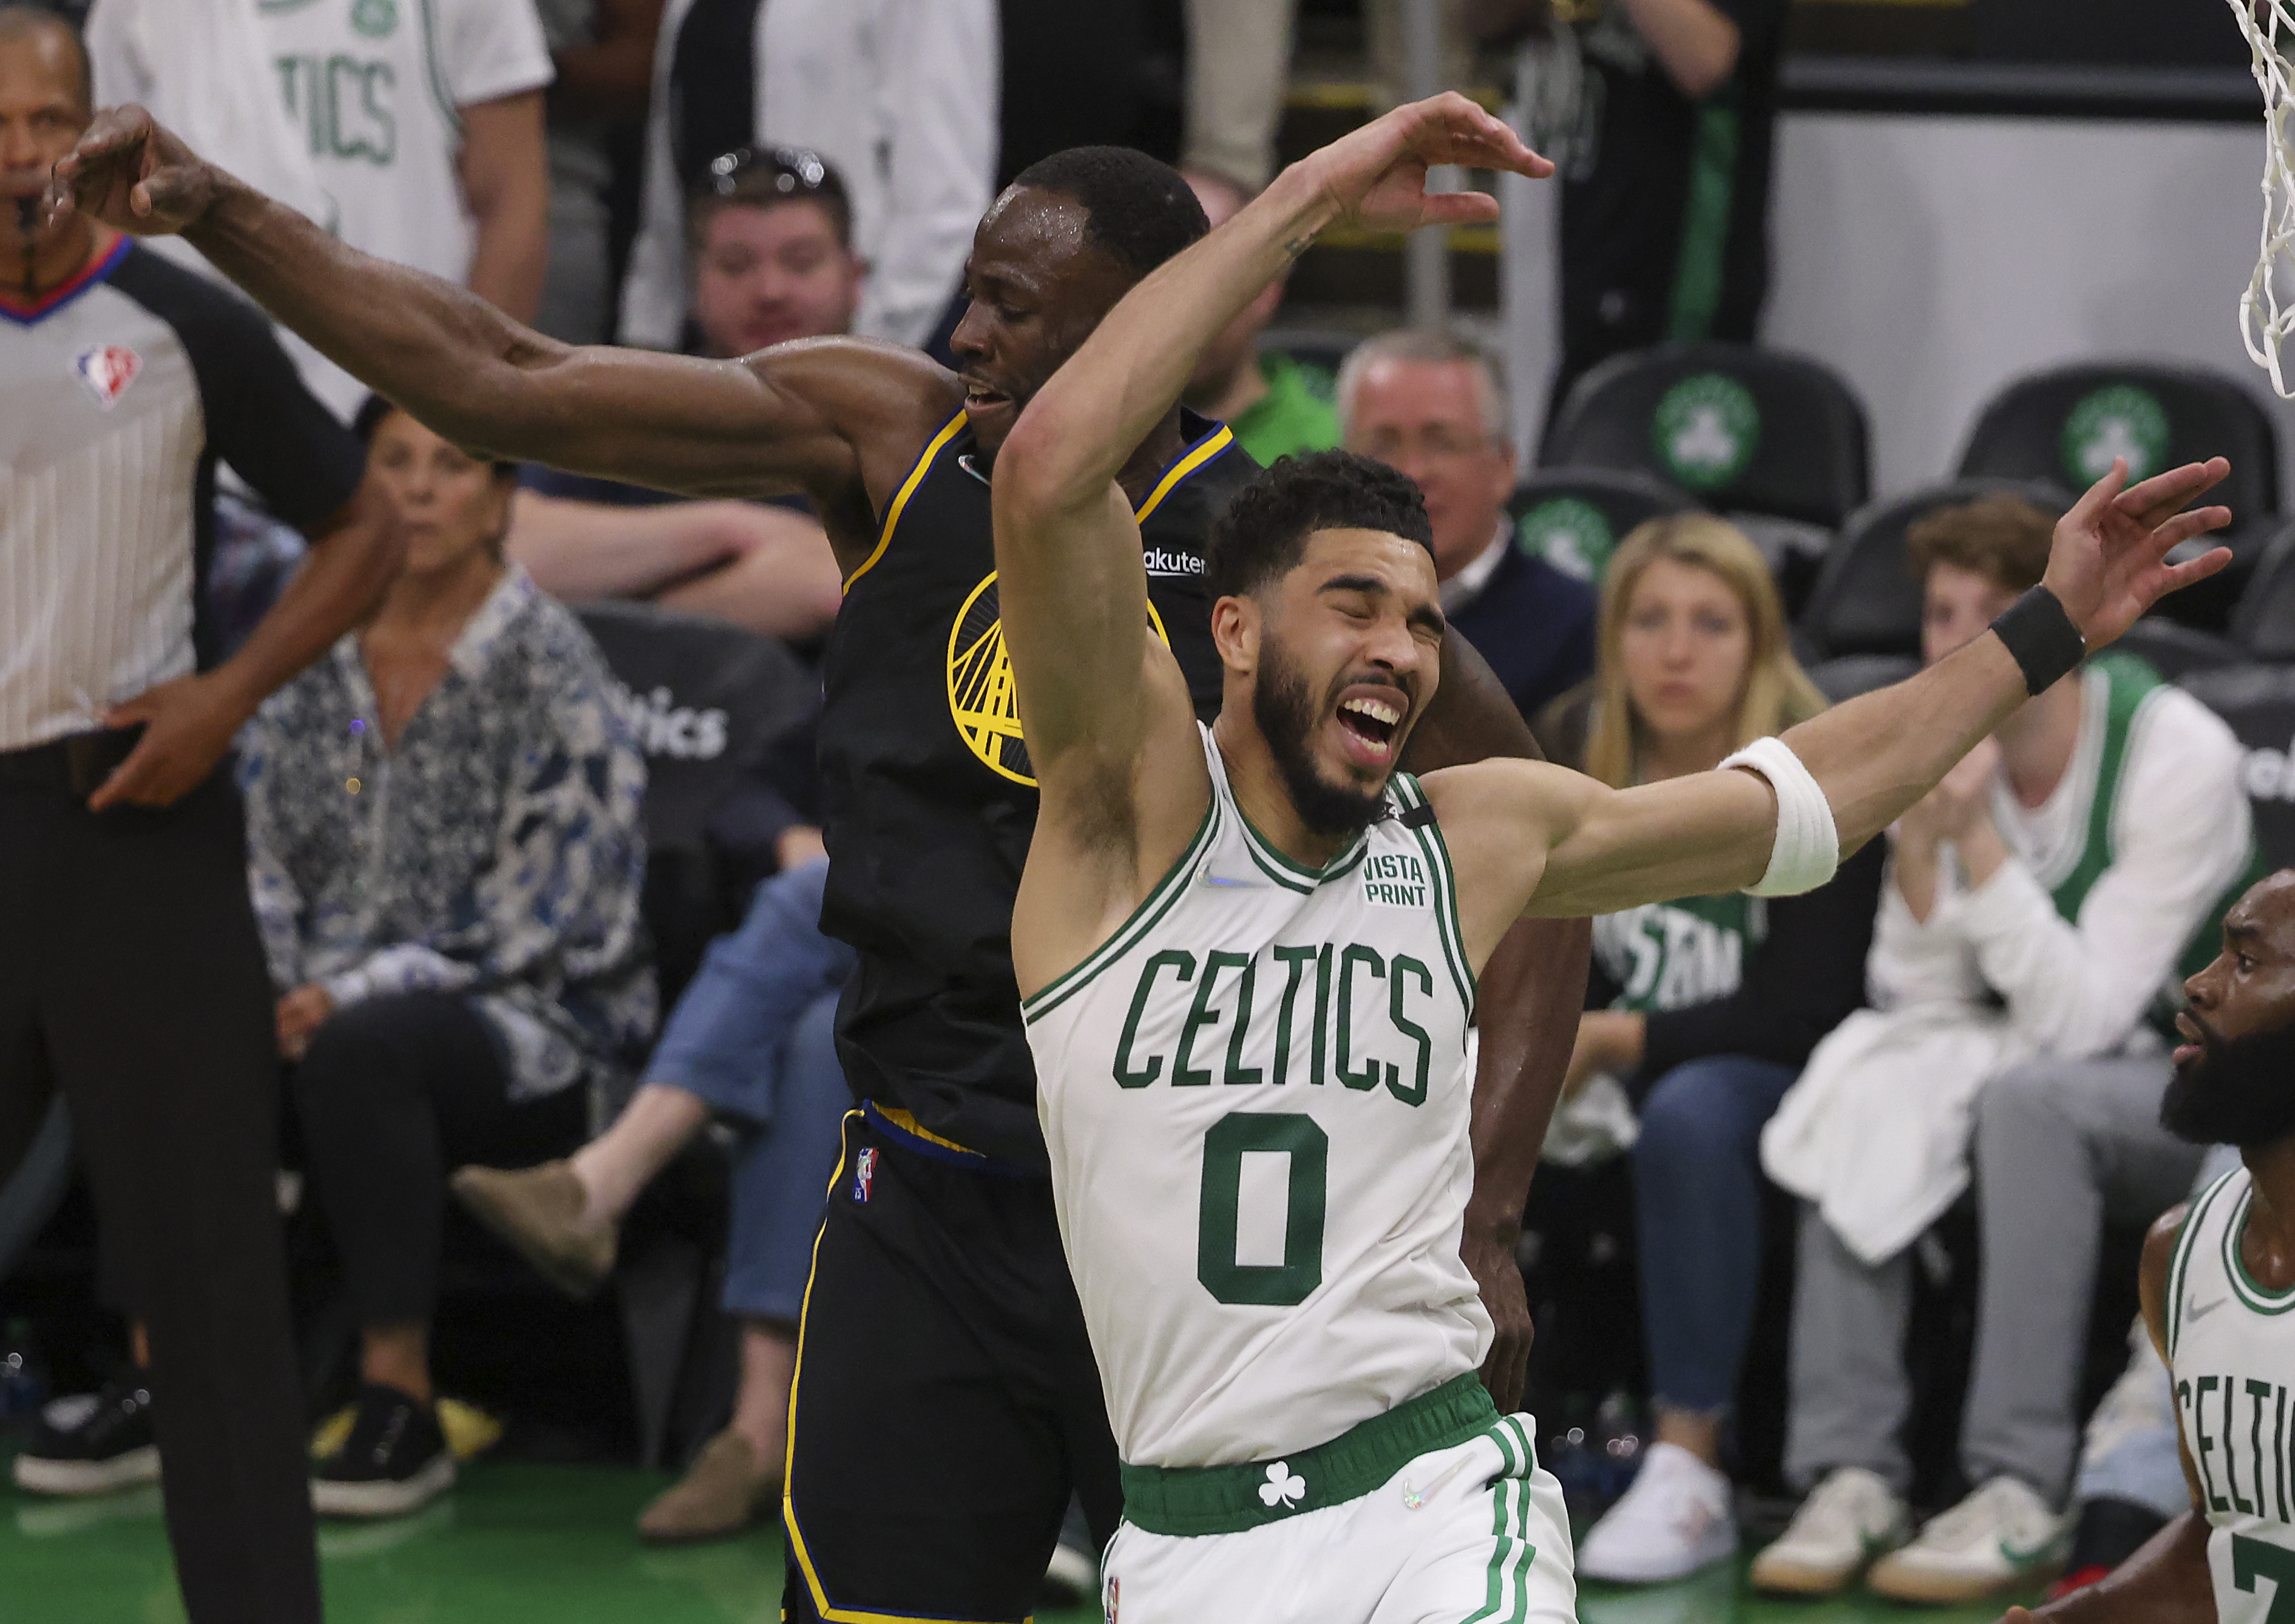 Celtics can't close out Warriors in Game 4, lose 107-97 in Steph